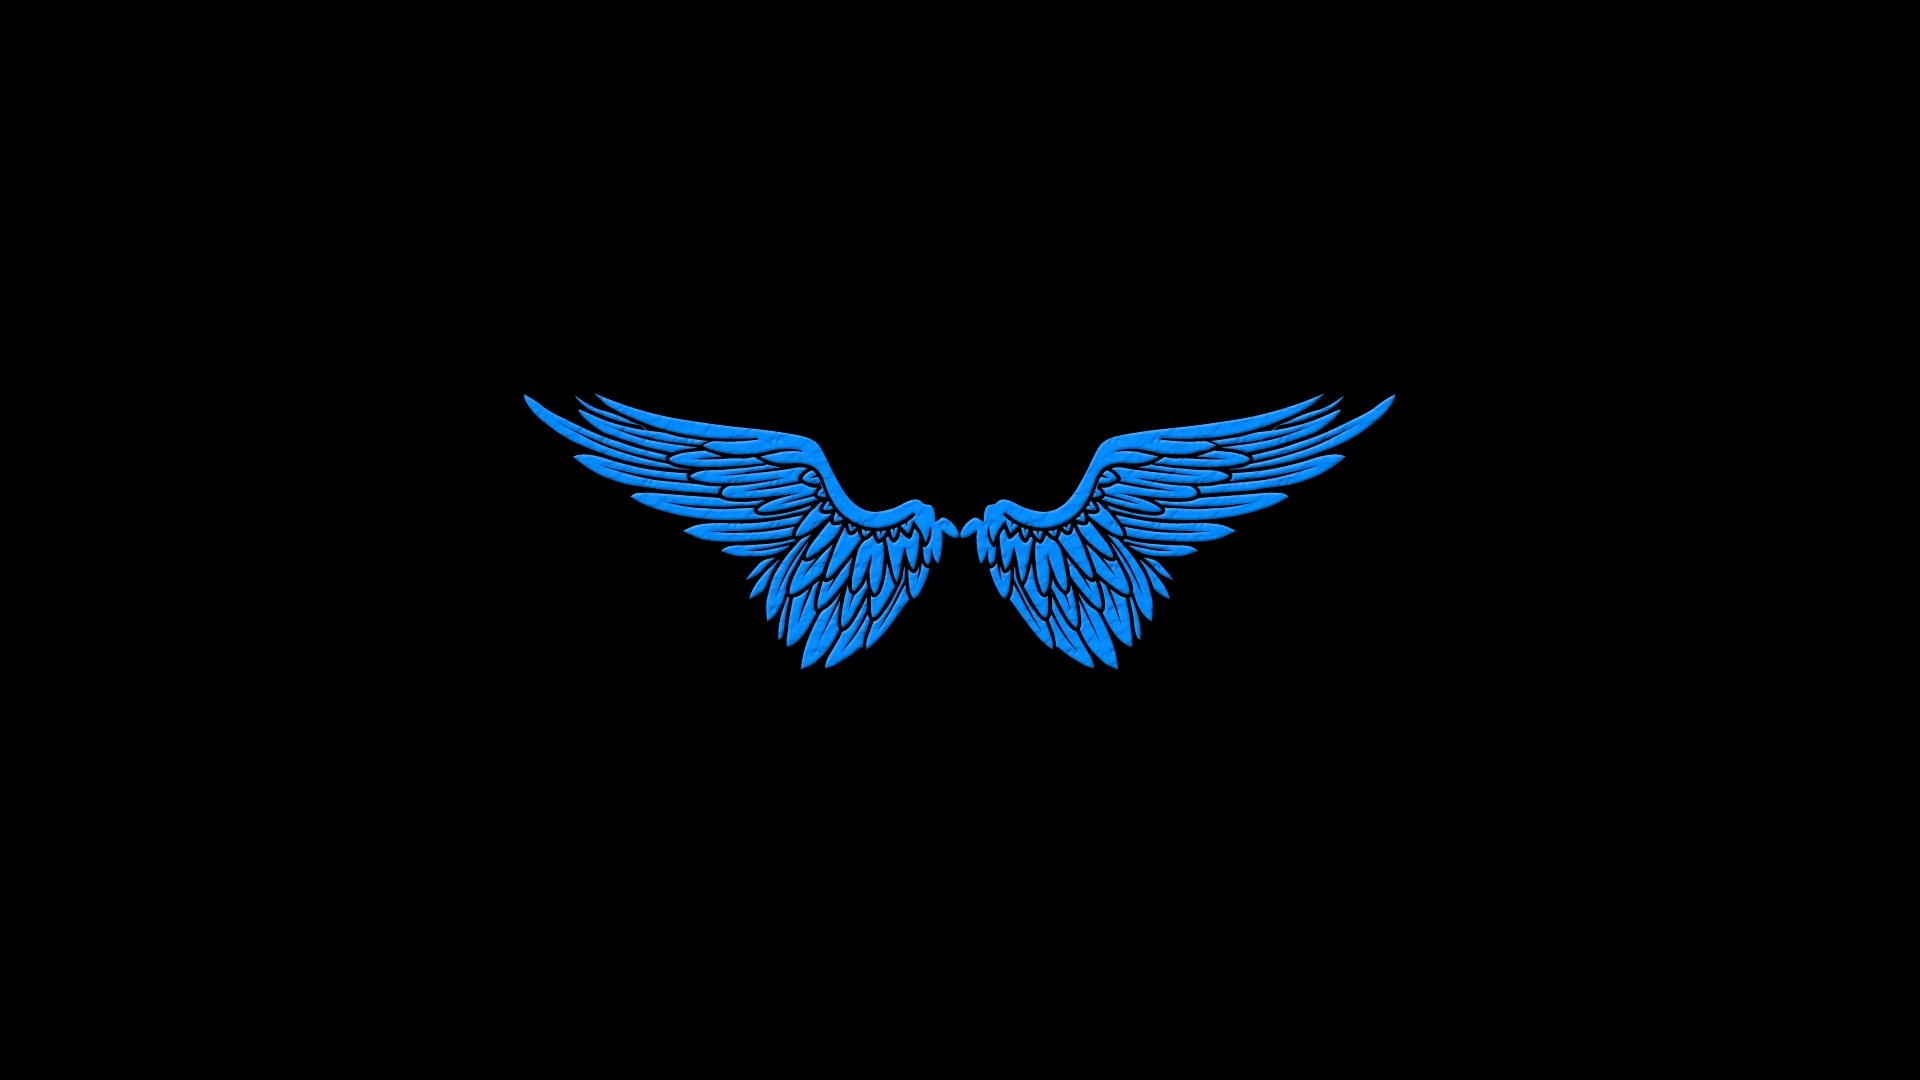 angels blue wings black minimalistic simple 1920x1080 wallpaper High Quality Wallpaper, High Definition Wallpaper